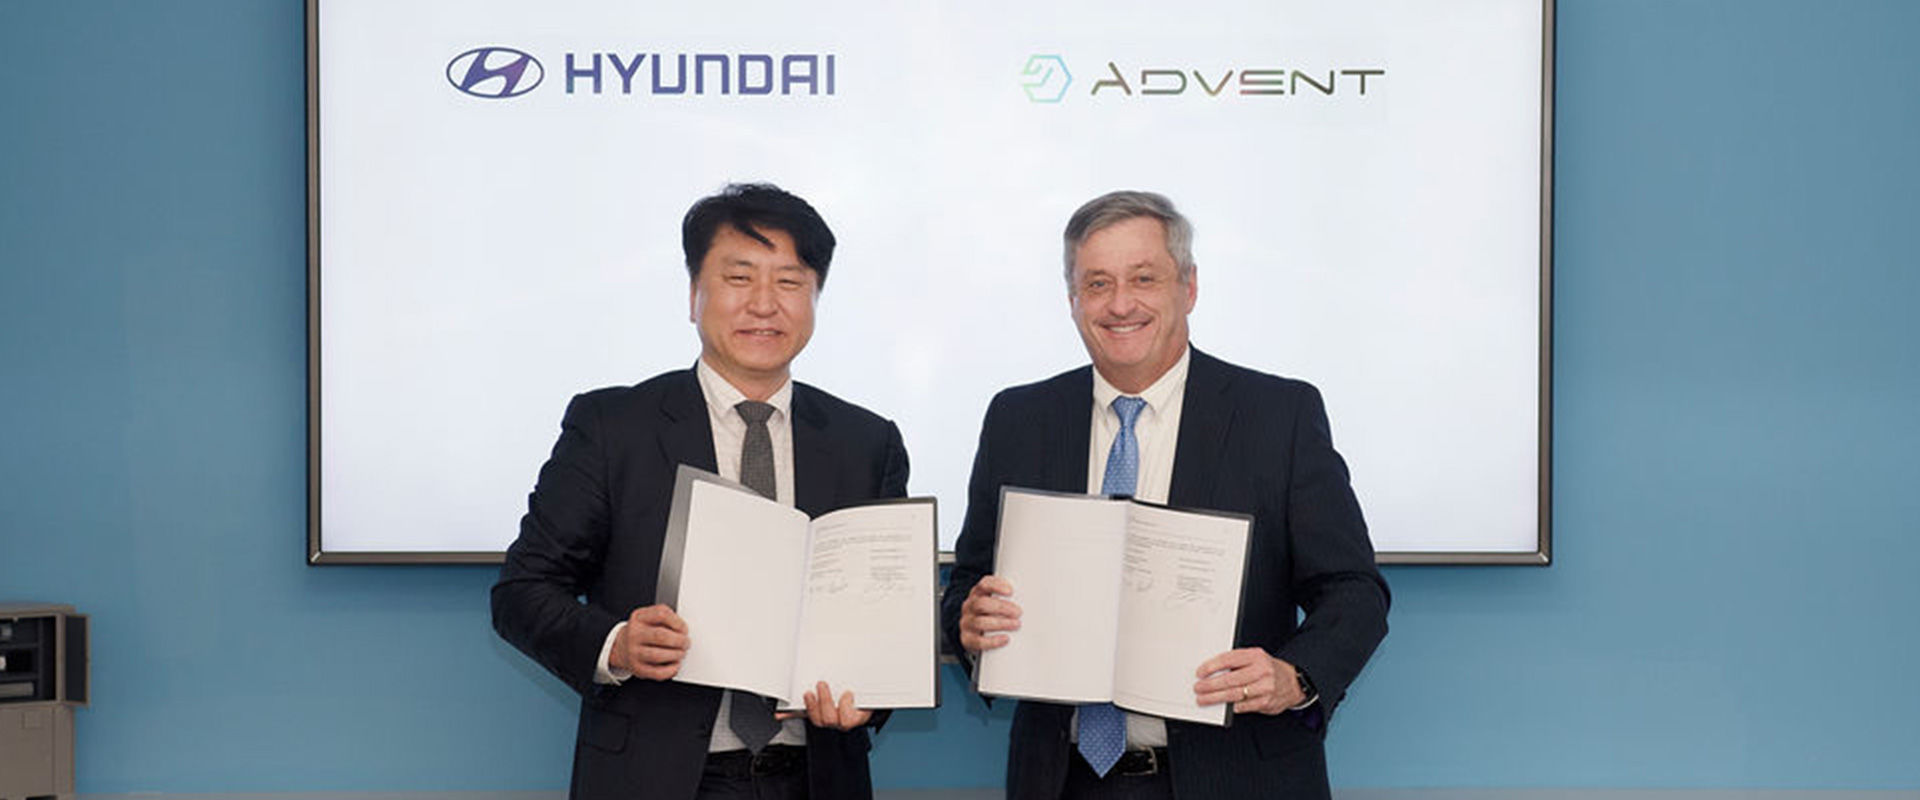 Hyundai Motor Company and Advent Technologies Sign Joint Development Agreement Following Successful Fuel Cell Technology Assessment